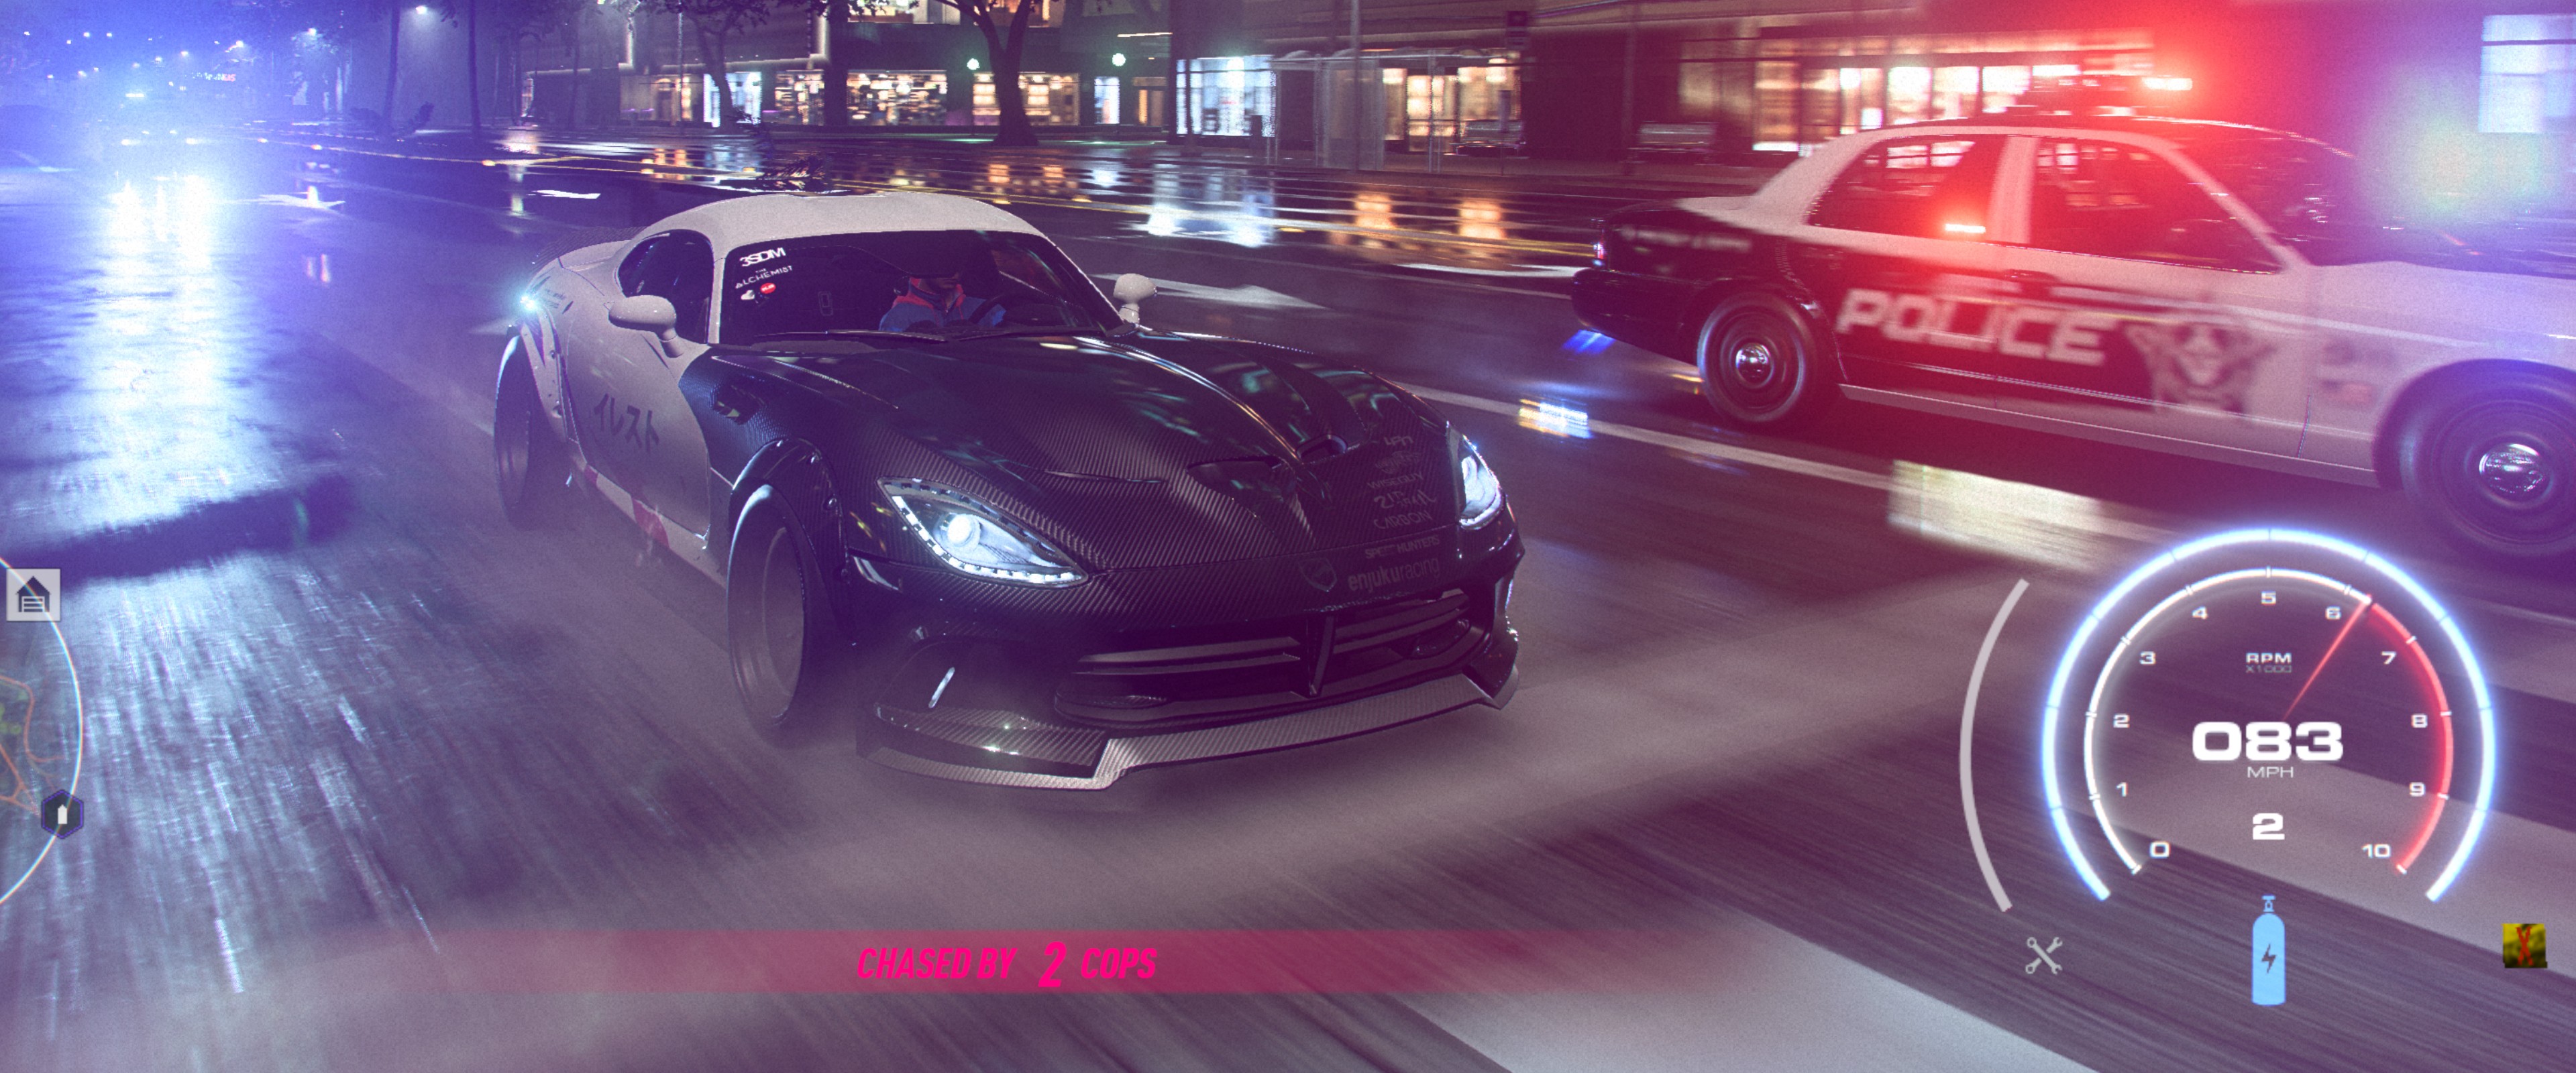 need for speed download mac